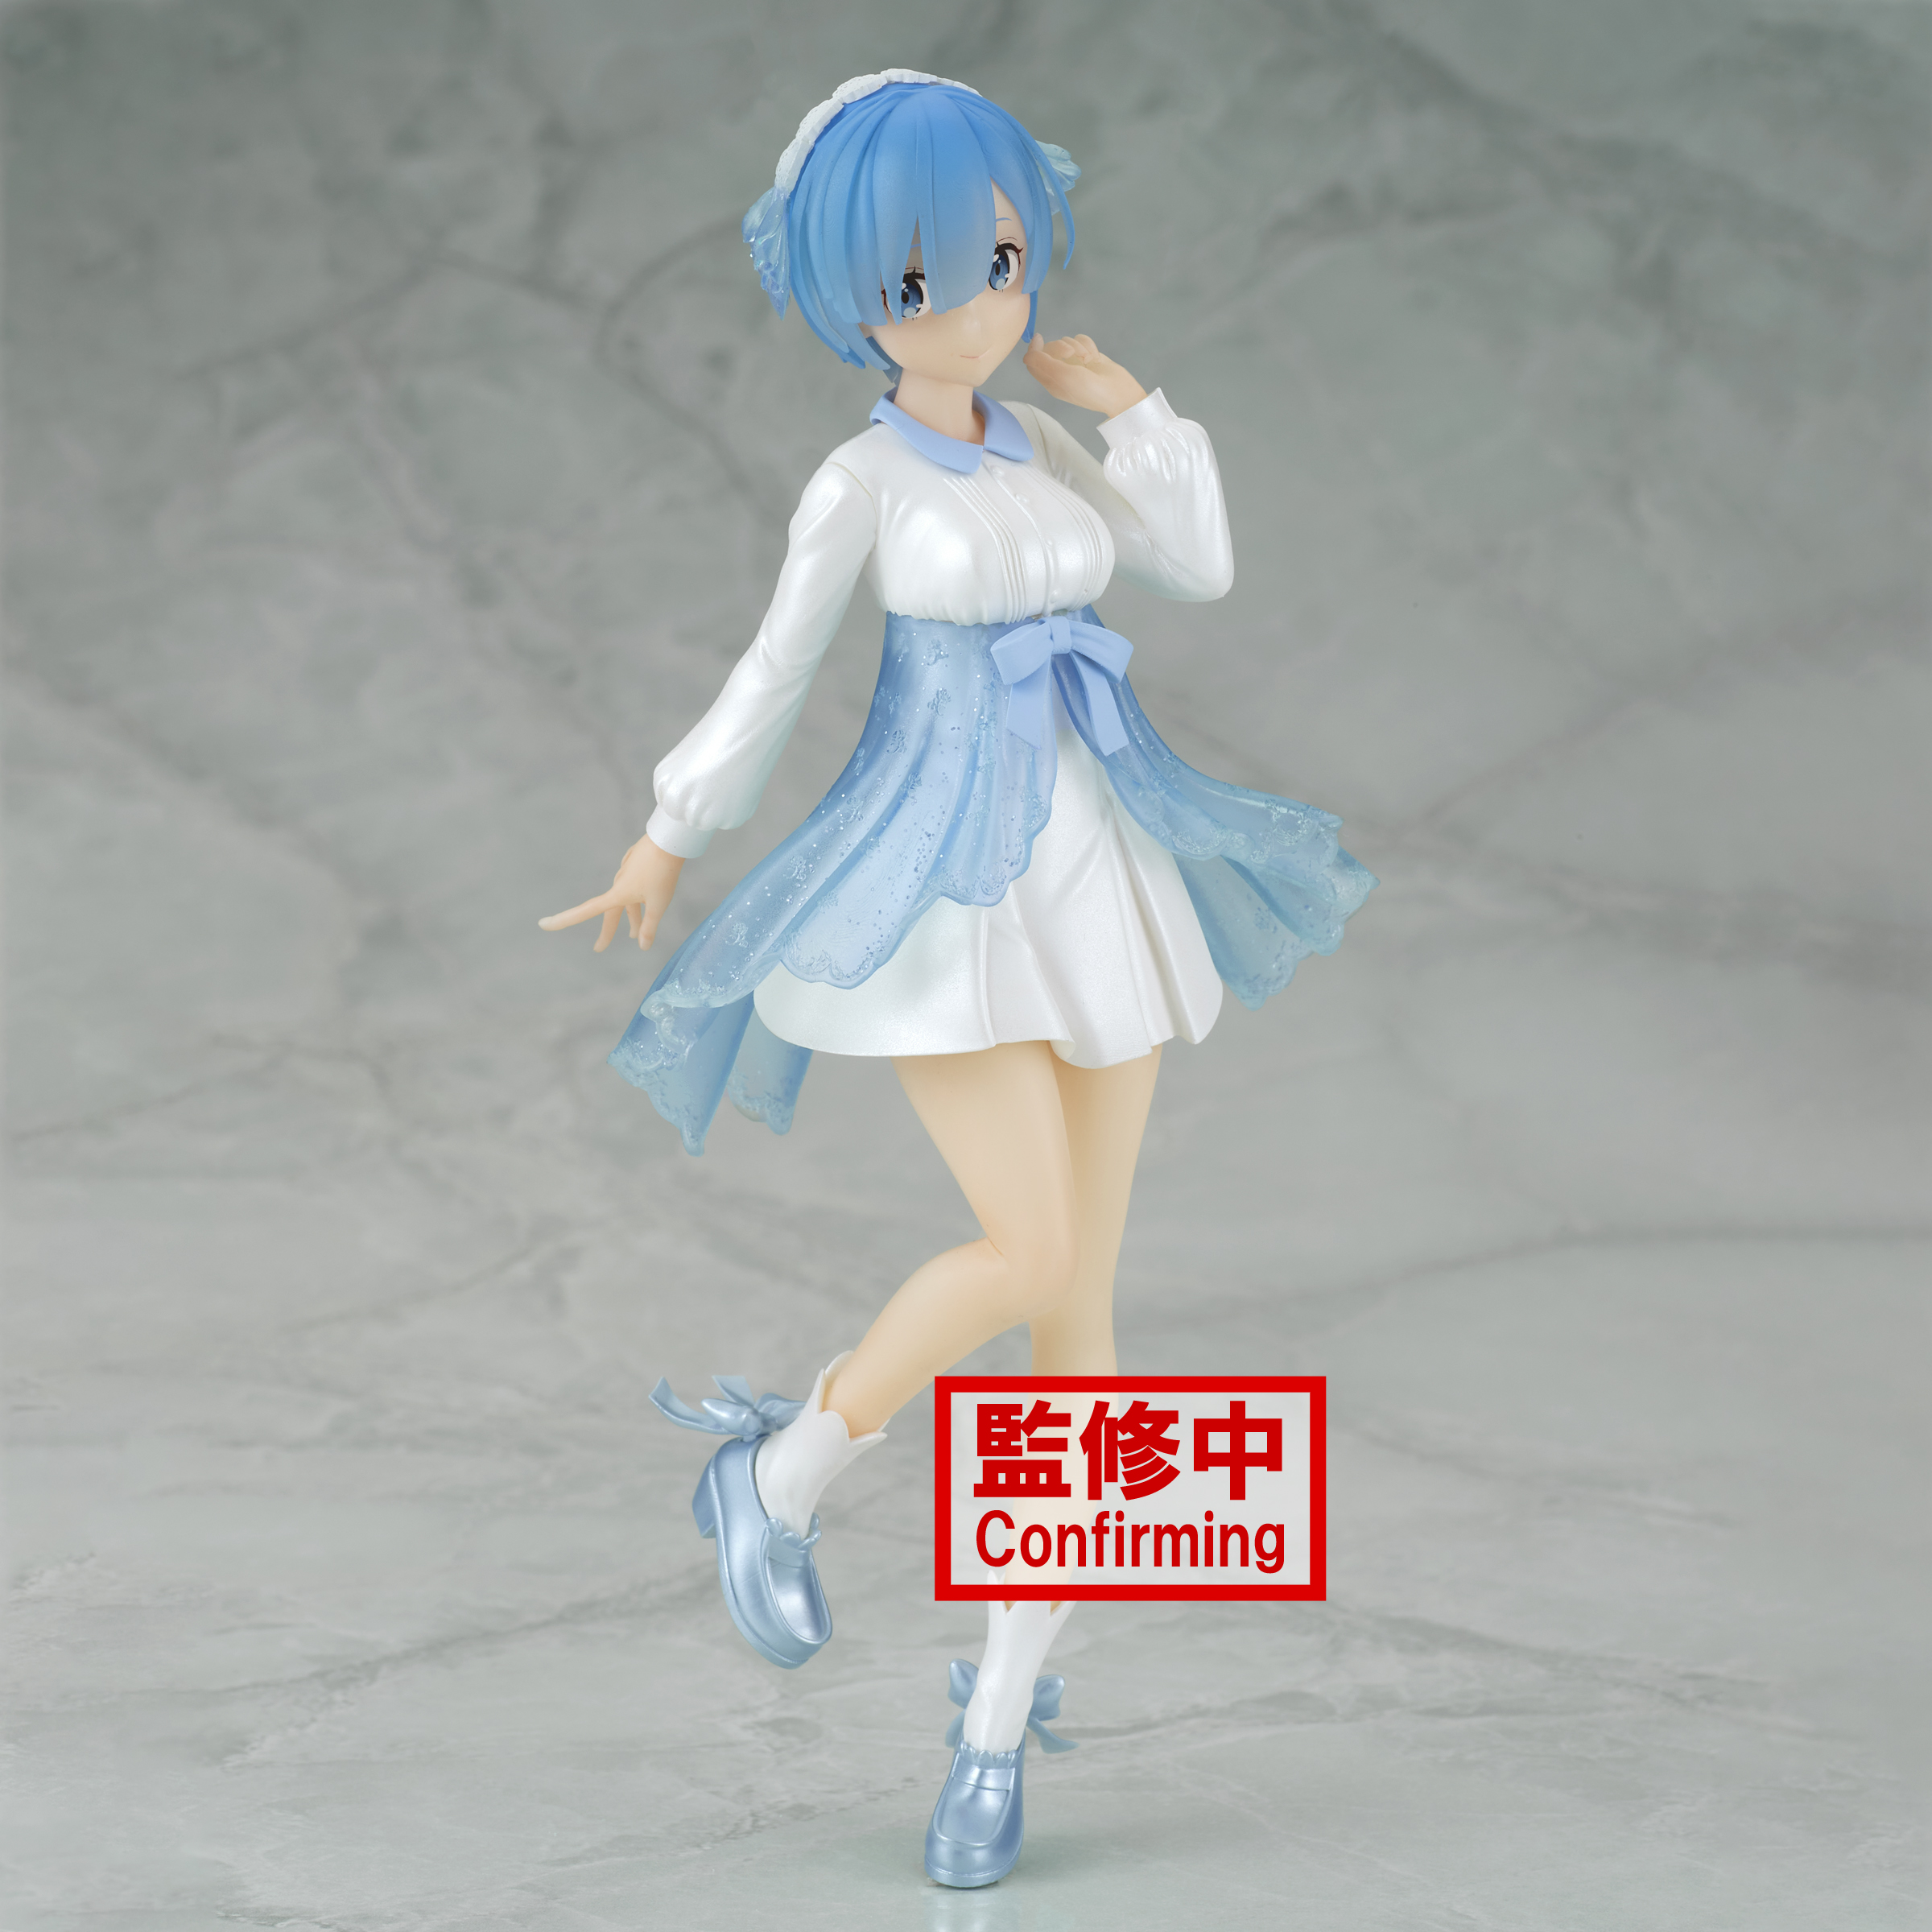 Rem Embraces Her Child Self in Adorable New Re:ZERO Figure - Crunchyroll  News